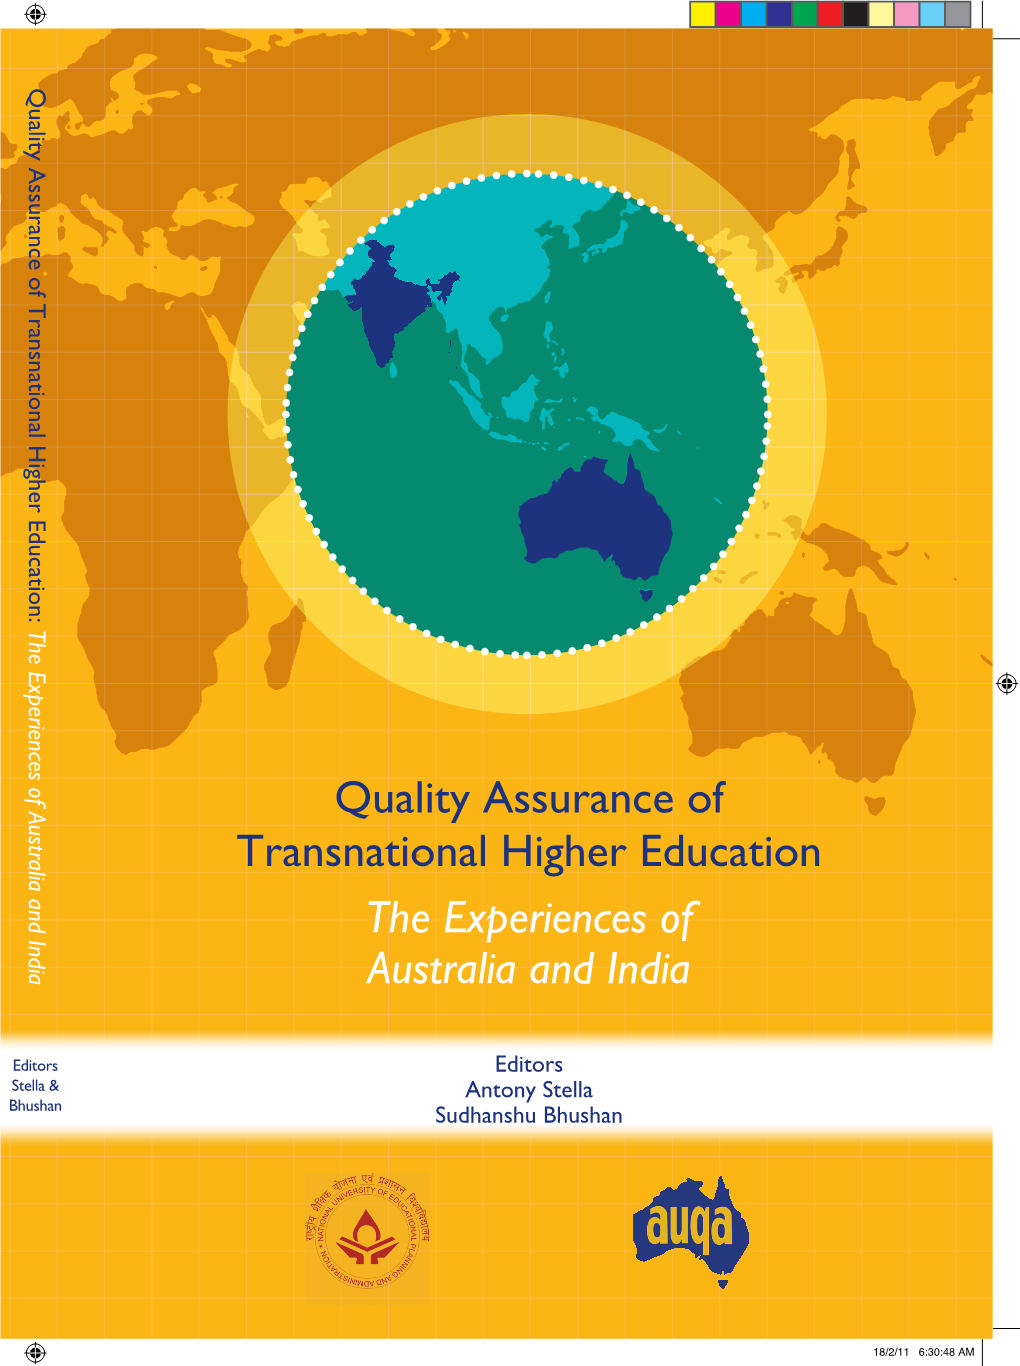 Quality Assurance of Transnational Higher Education